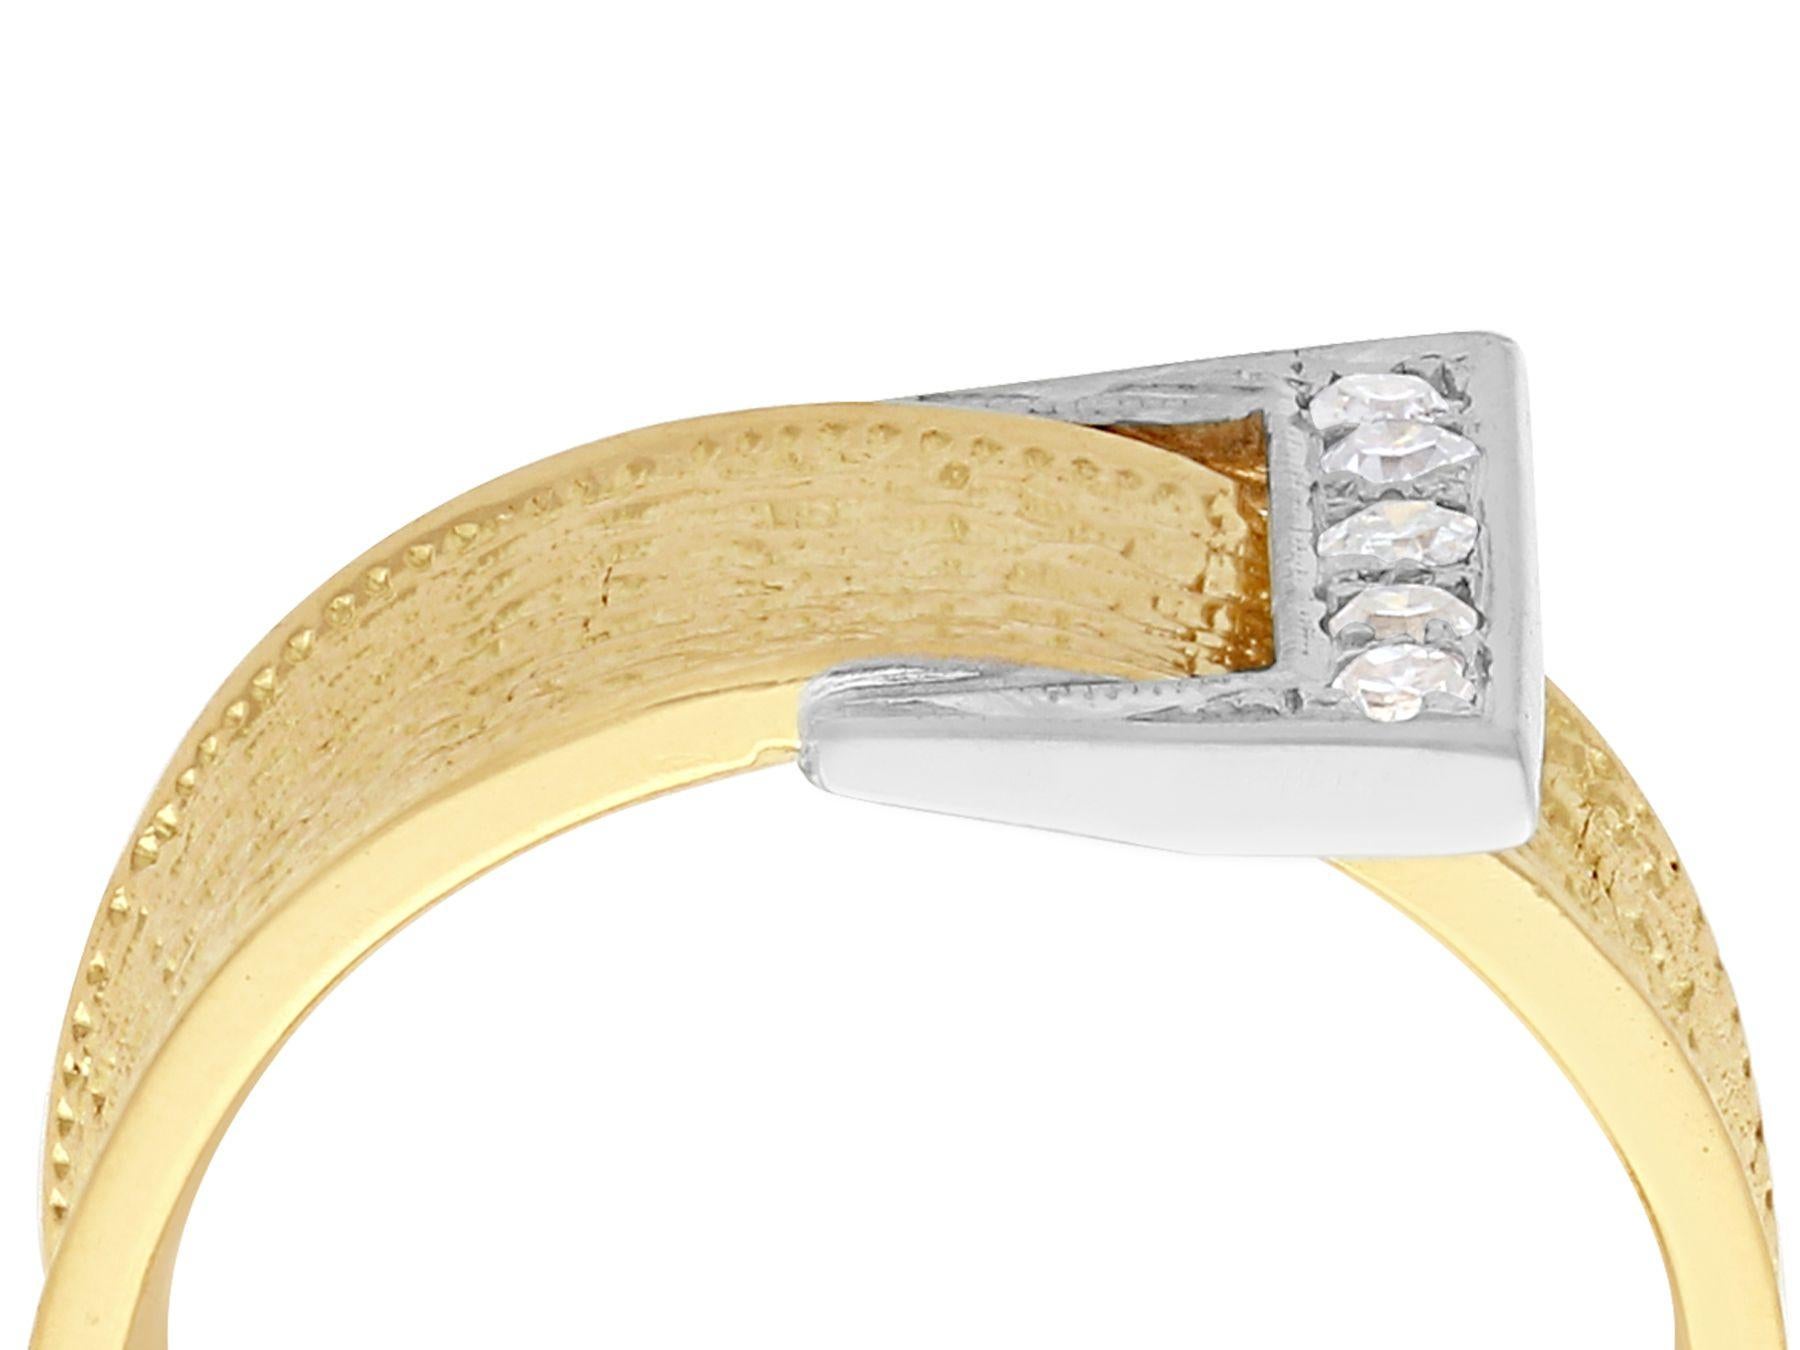 A fine and impressive 0.12 carat diamond and 18 karat yellow gold, 18 karat white gold set dress ring; part of our of vintage jewelry and estate jewelry collections.

This fine and impressive vintage belt and buckle ring has been crafted in 18k